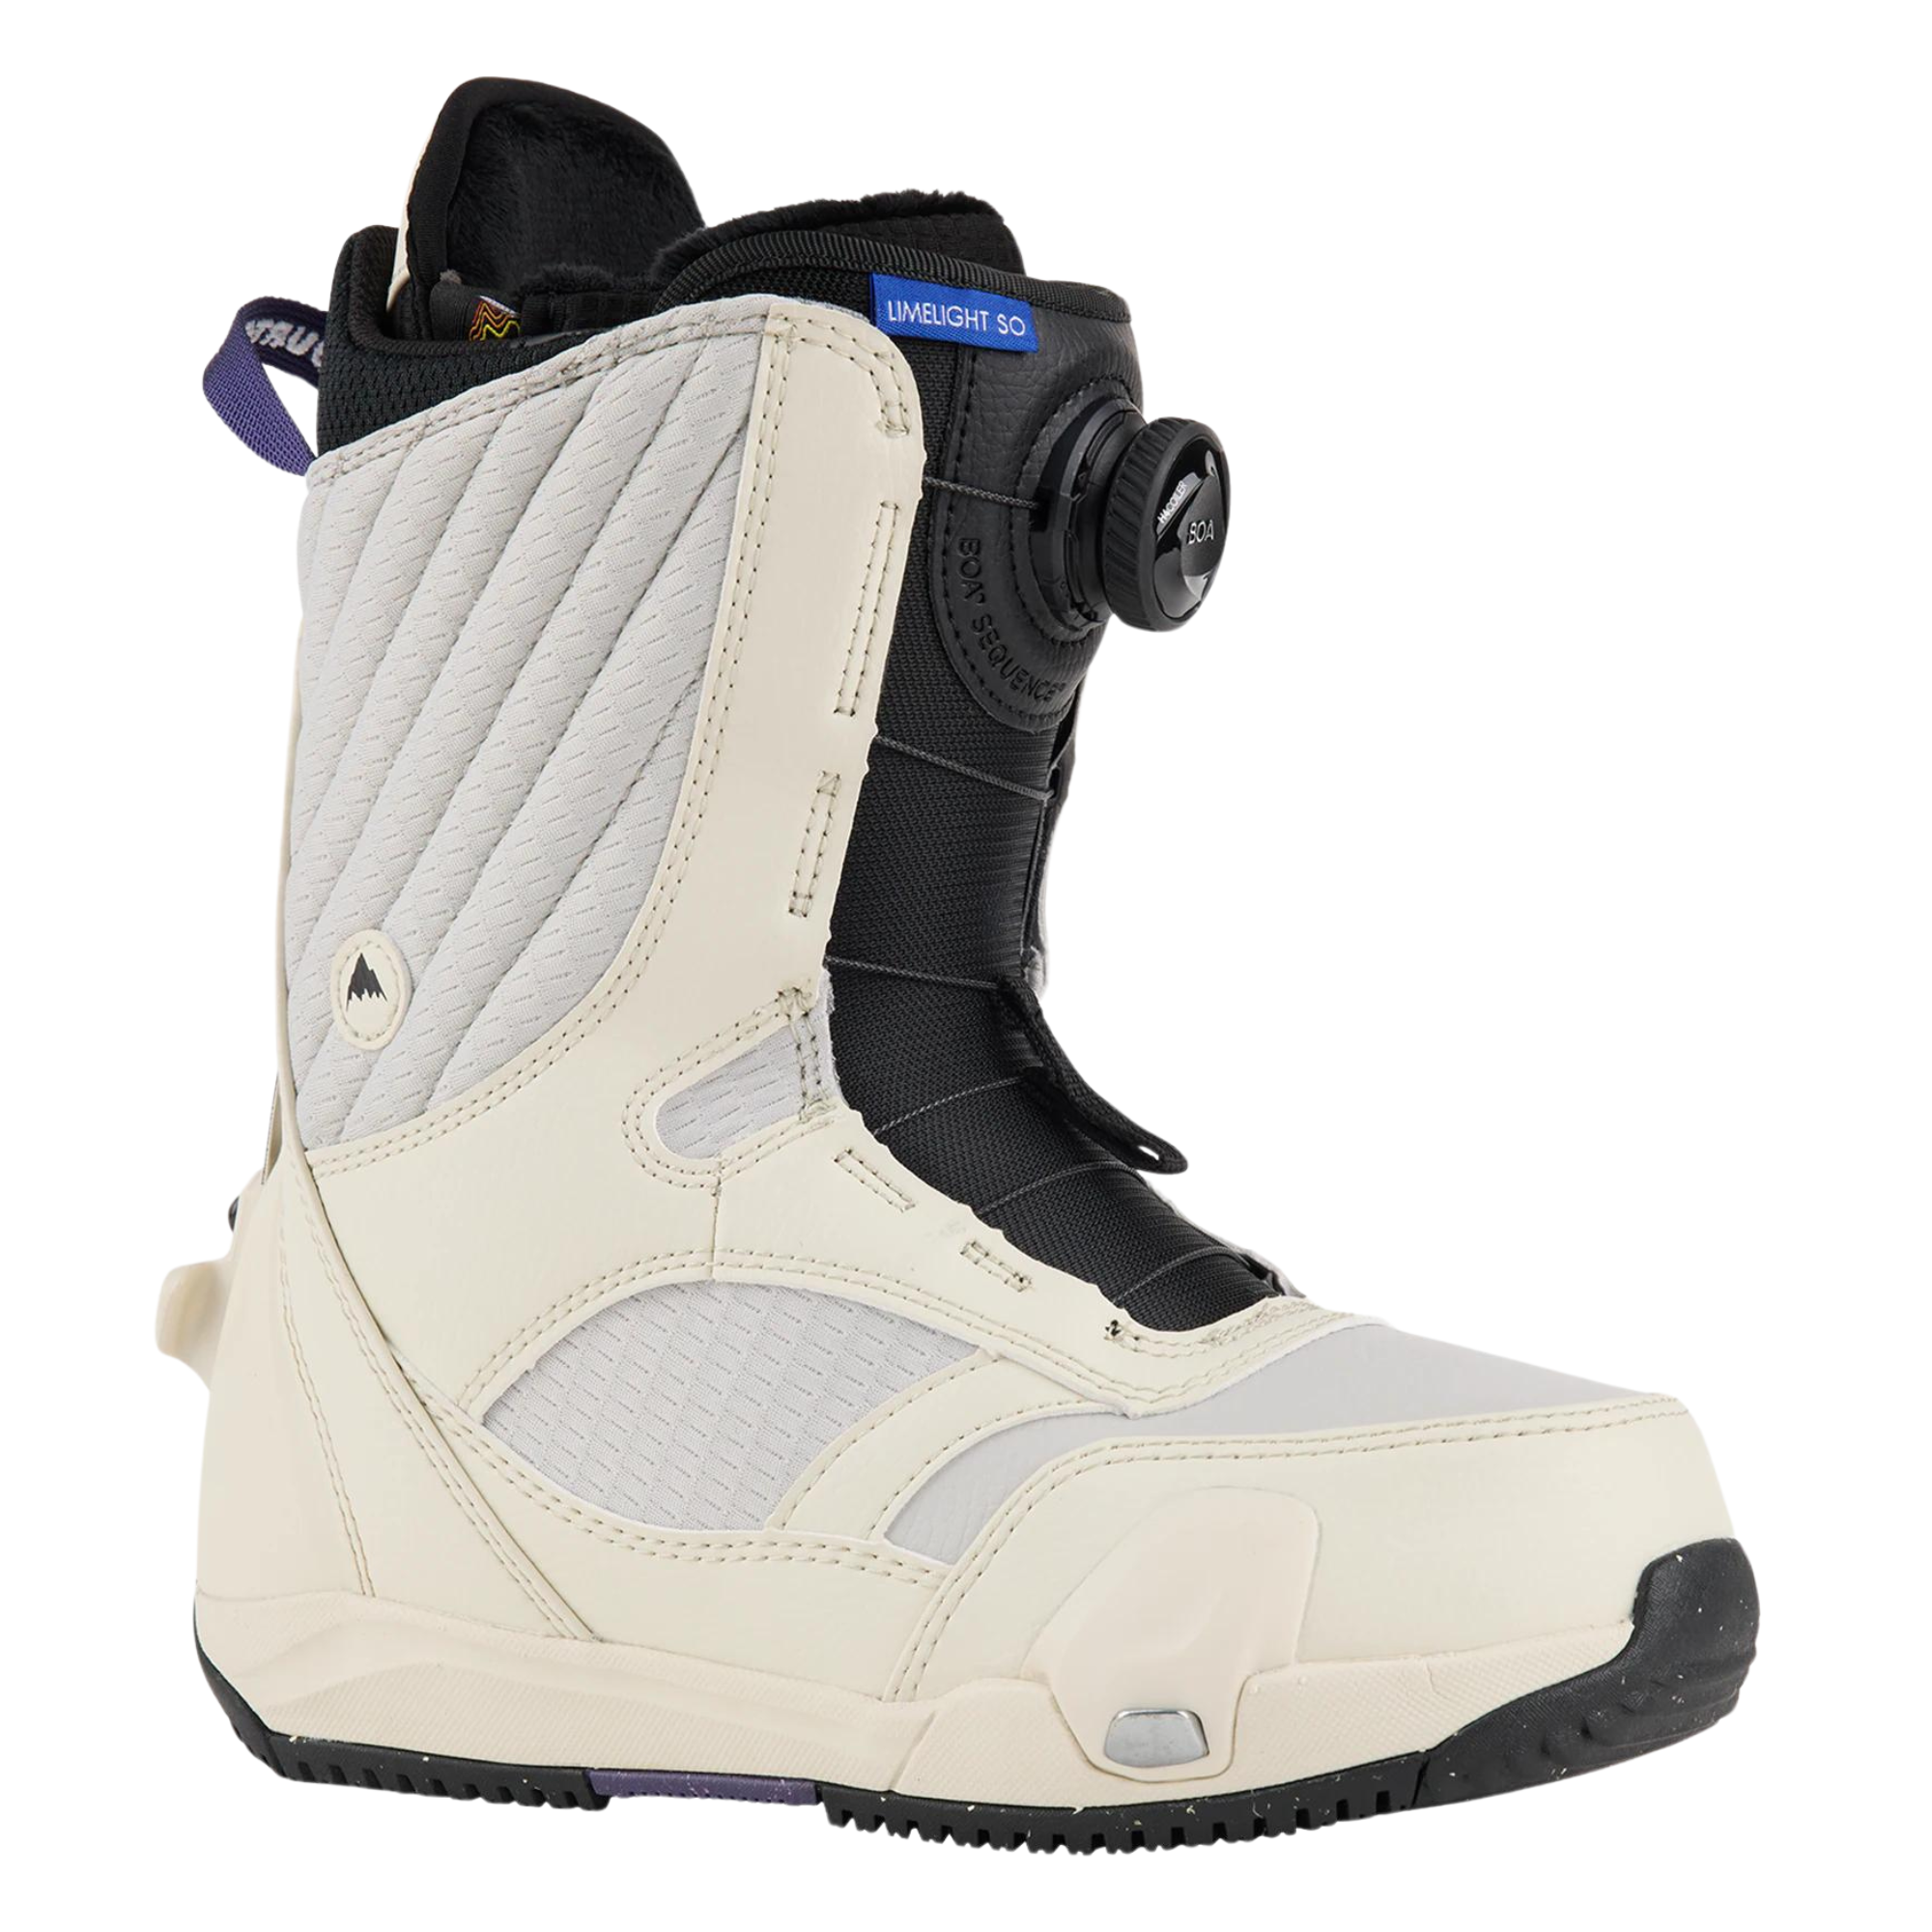 Burton Women's Limelight Step On® Snowboard Boots - Wide - Stout White